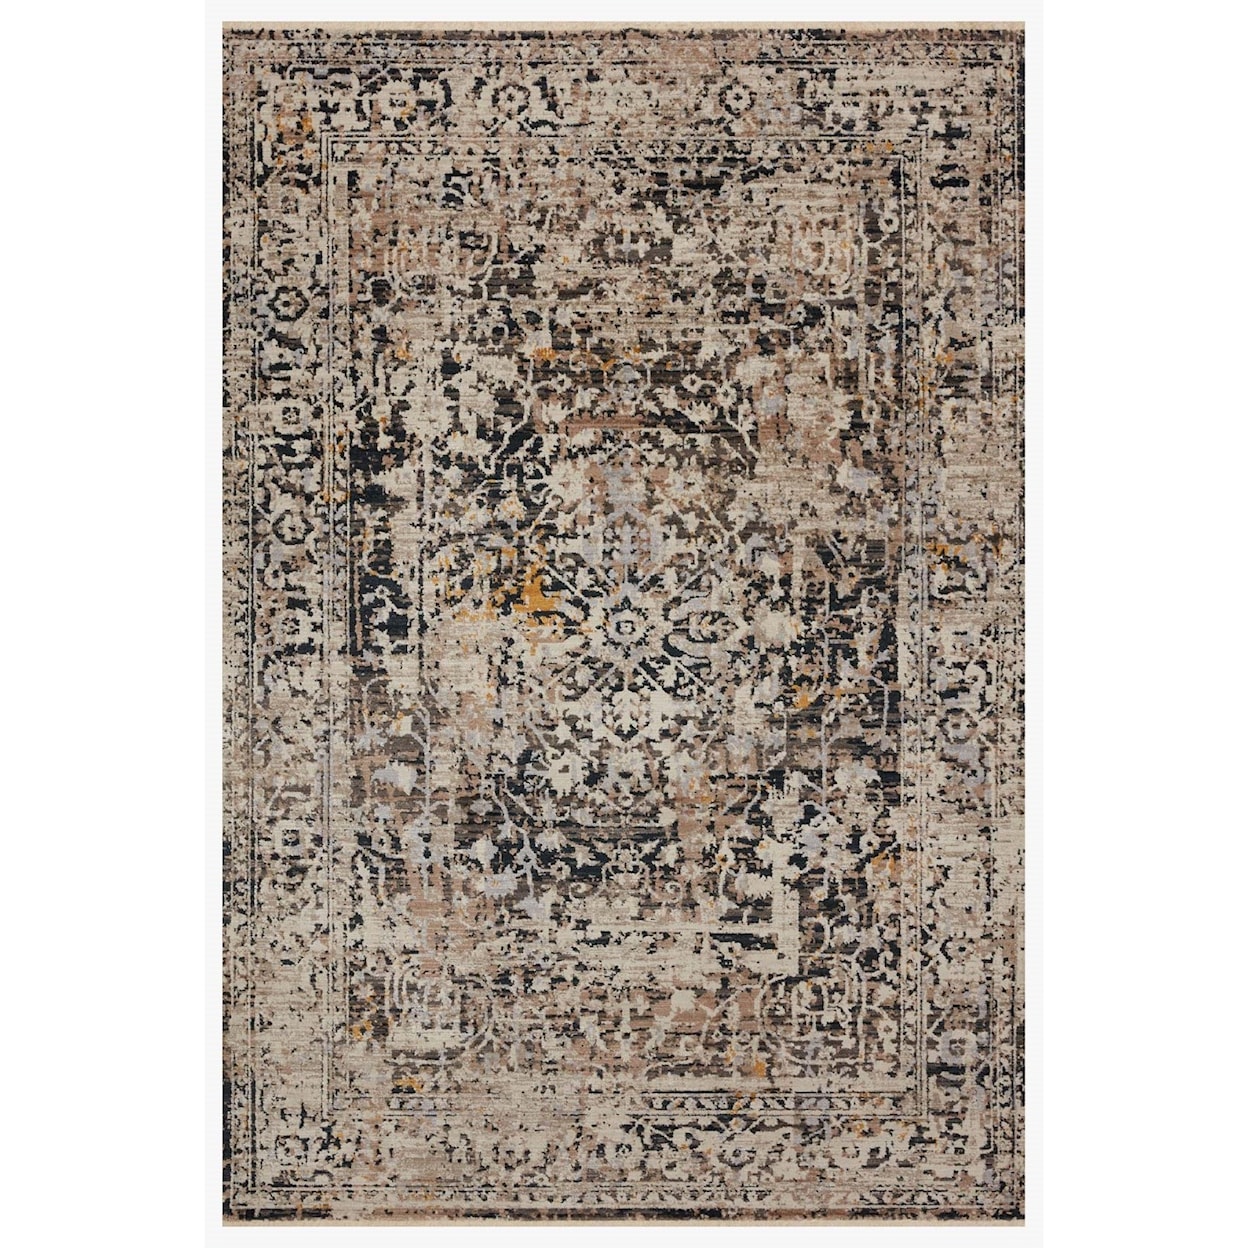 Reeds Rugs Leigh 5'3" x 7'6" Charcoal / Taupe Rug